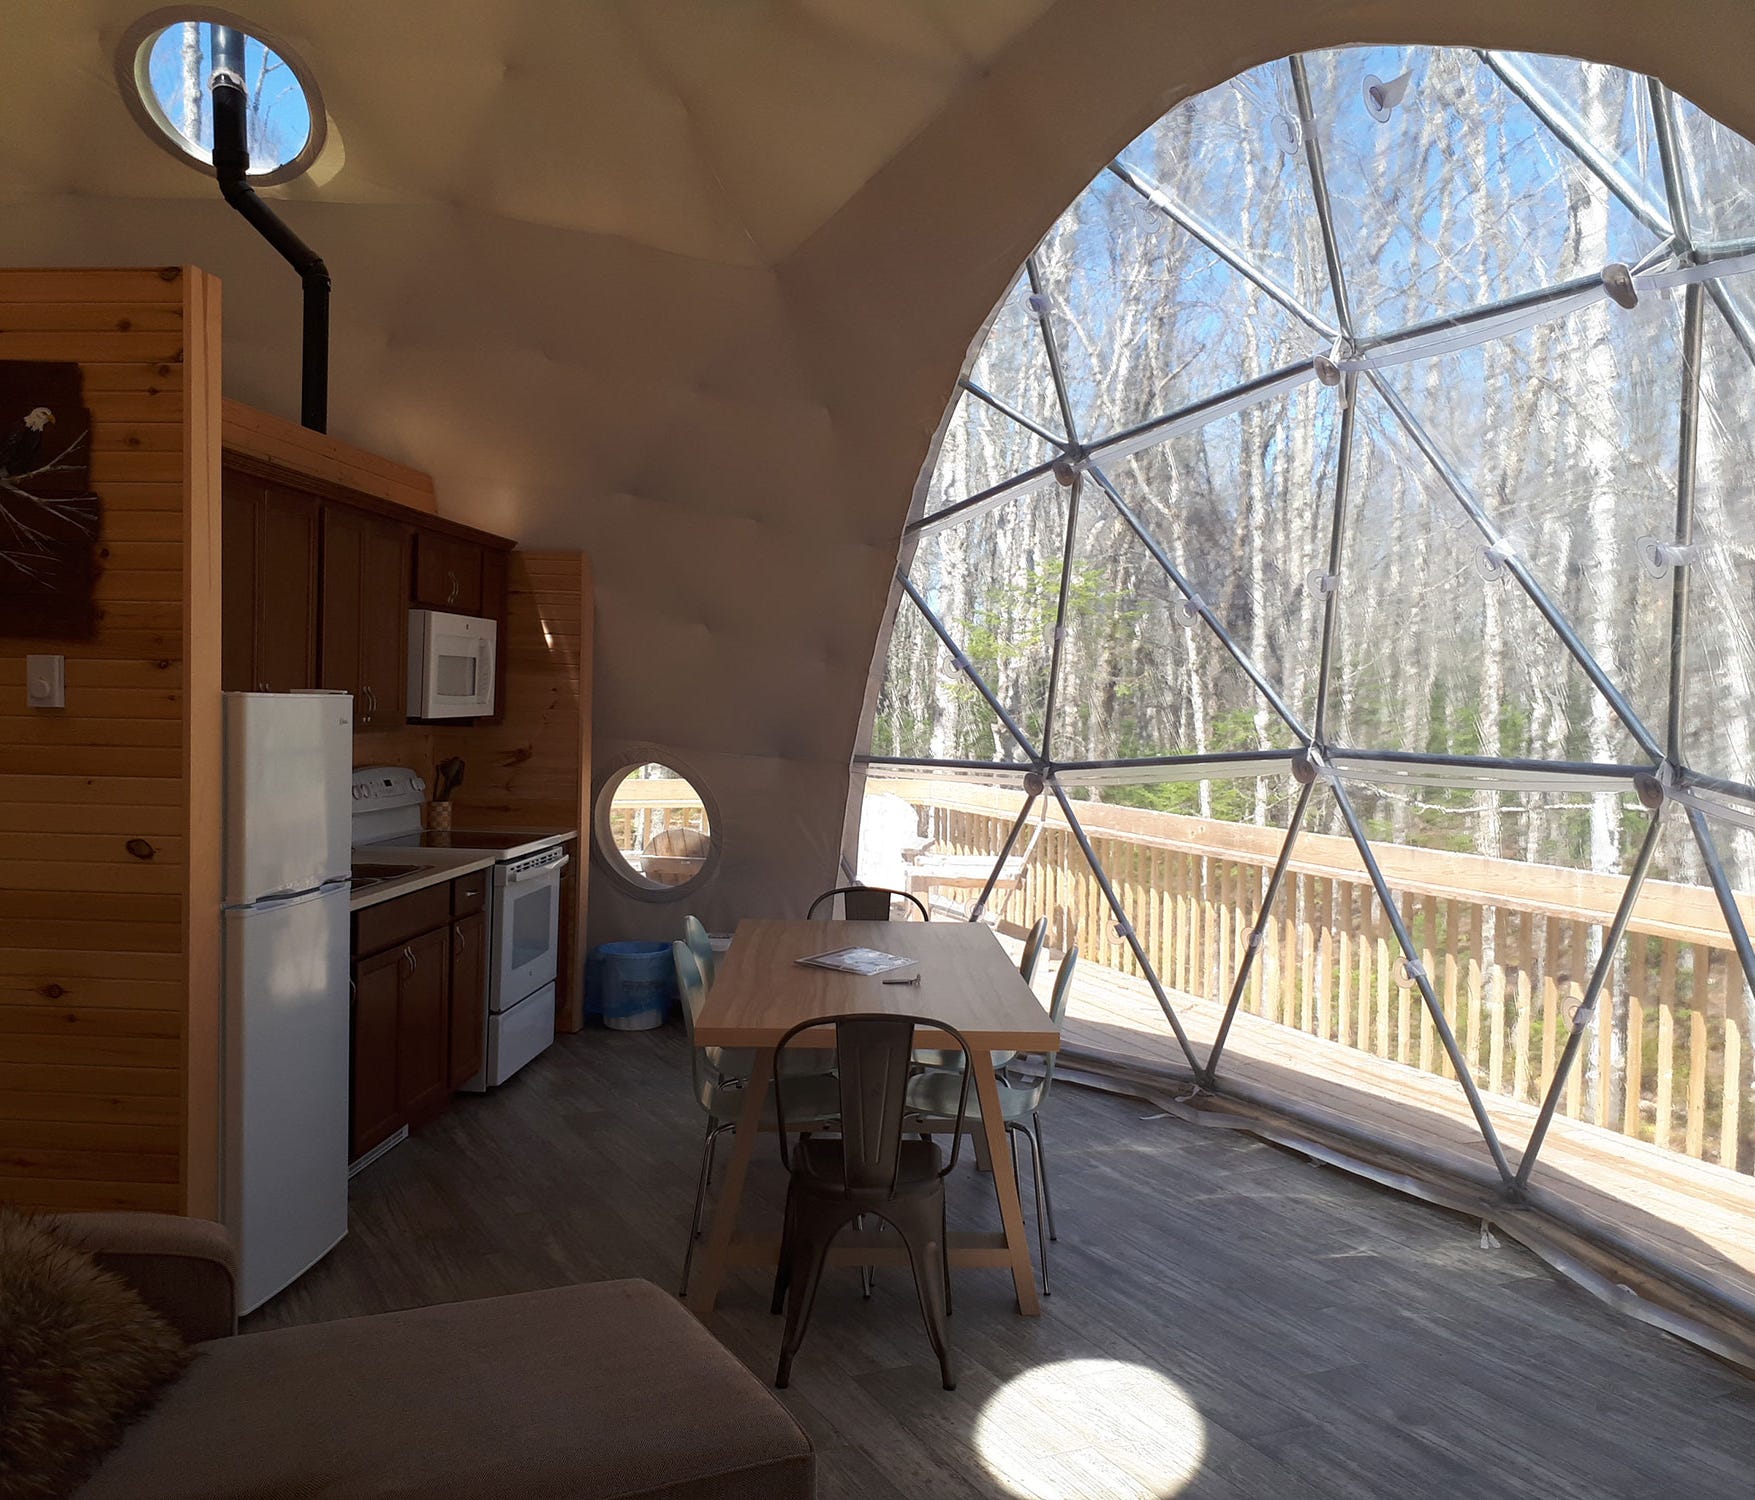 Tucked away in the forest on Prince Edward Island is Tree Top Haven, which features five little pods of magic: one- and two-bedroom geodesic domes that sit atop large wraparound decks, creating the sense that you are part of the forest with fabulous 